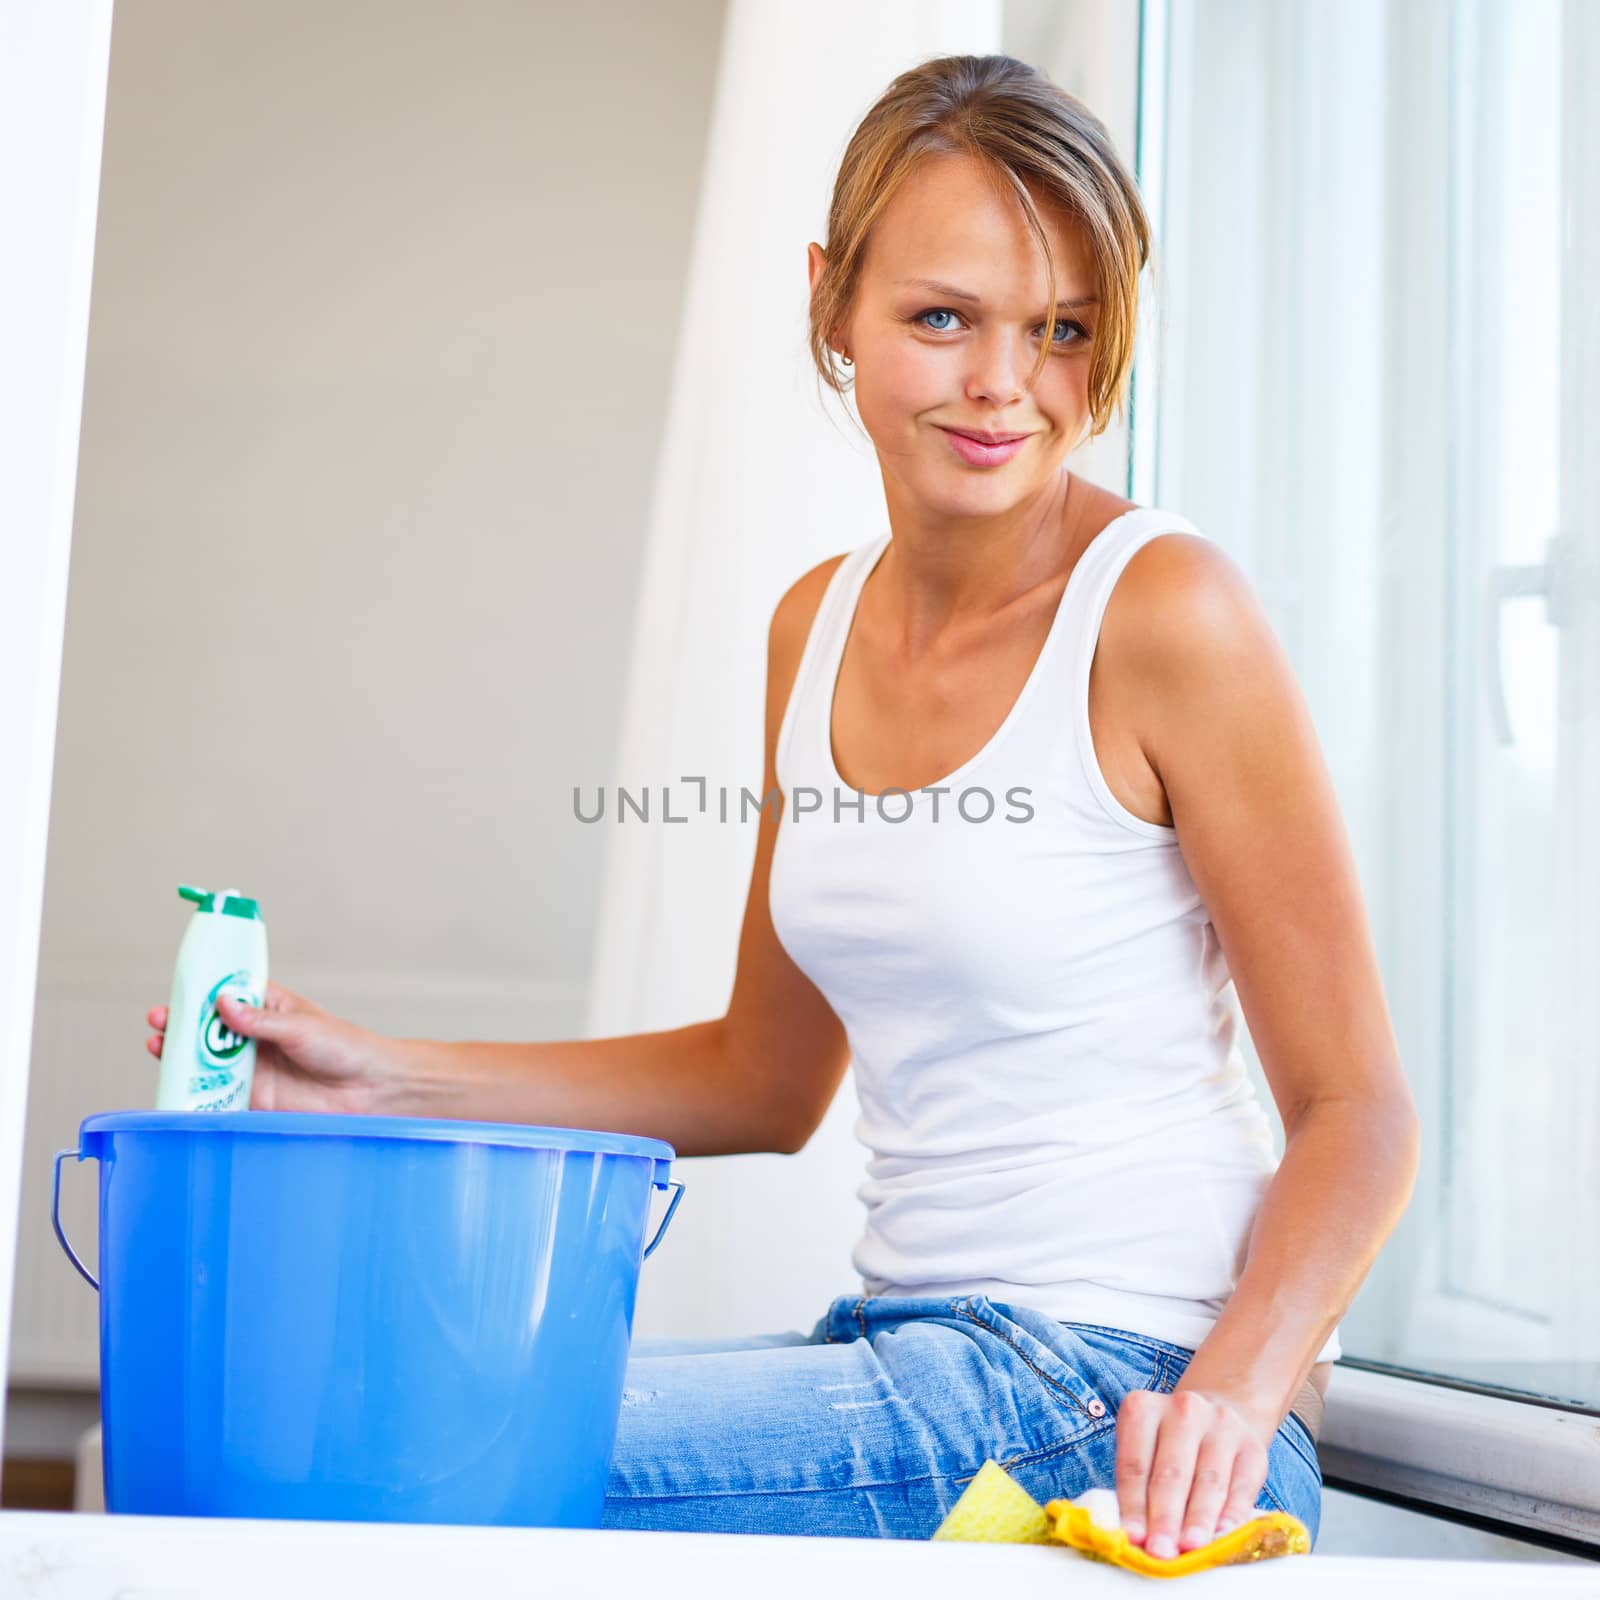 Pretty, young woman doing house work - washing windows (shallow  by viktor_cap